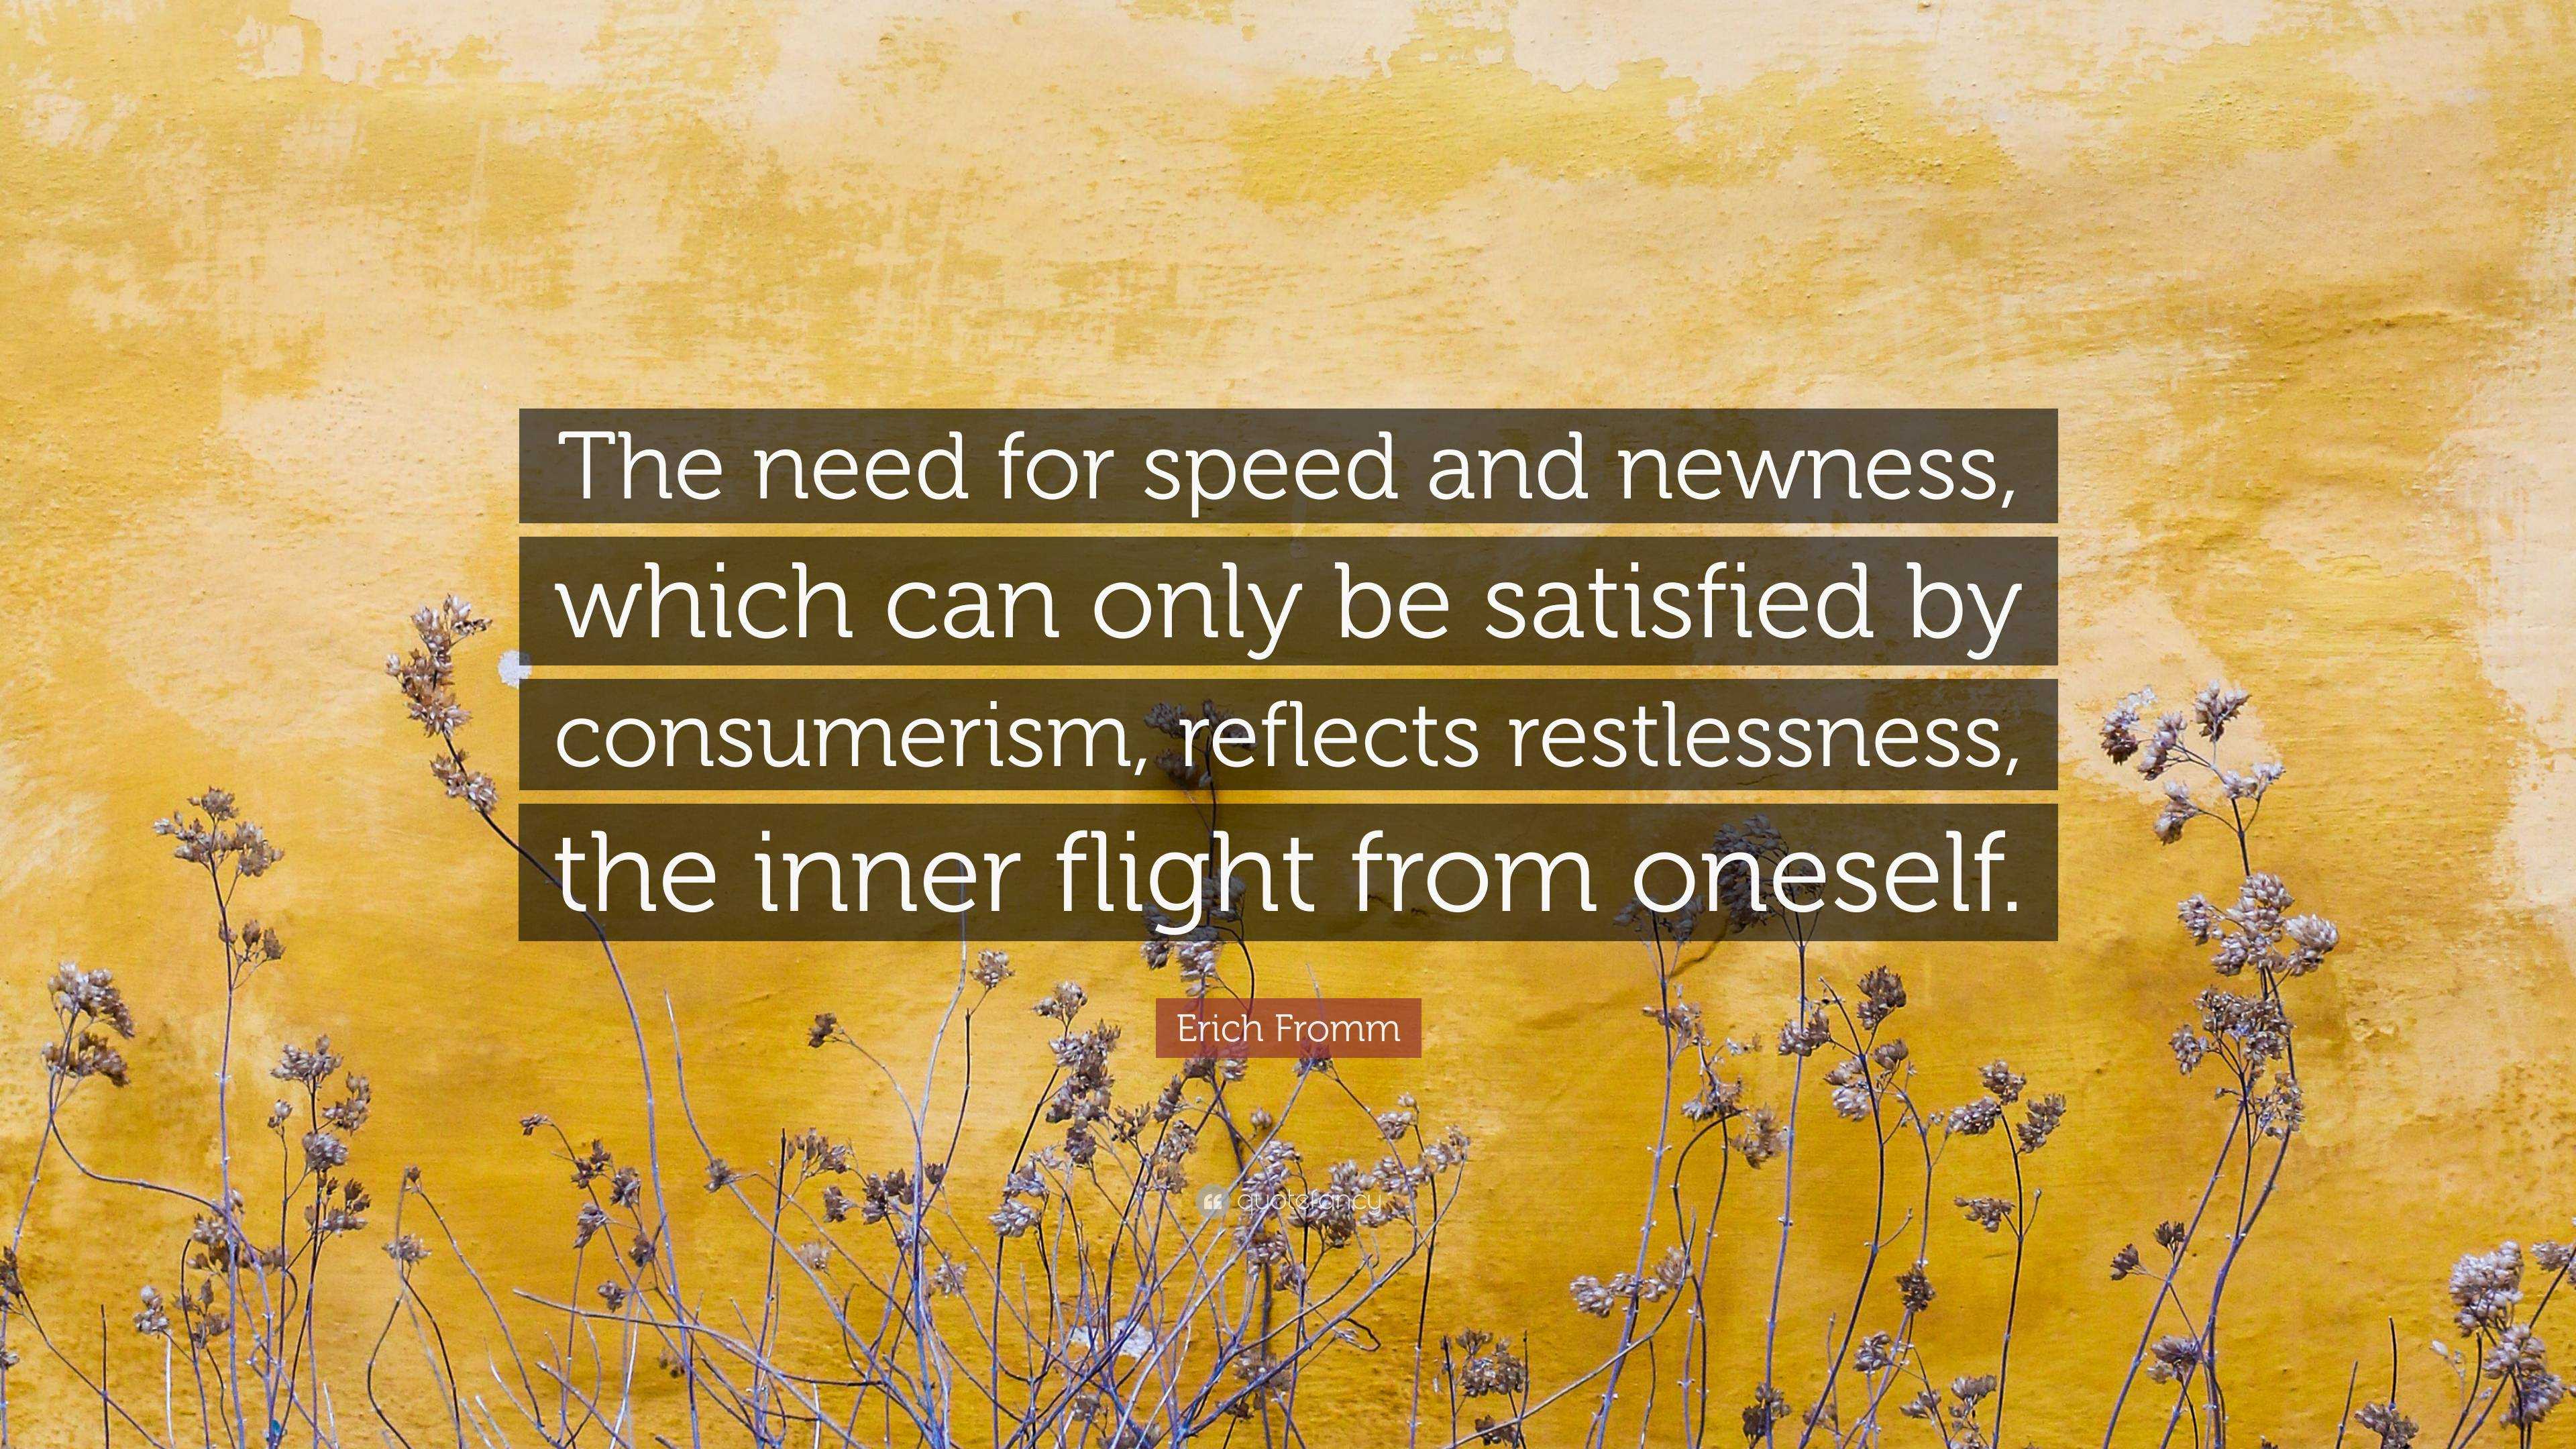 Erich Fromm Quote: “The need for speed and newness, which can only be  satisfied by consumerism, reflects restlessness, the inner flight from”